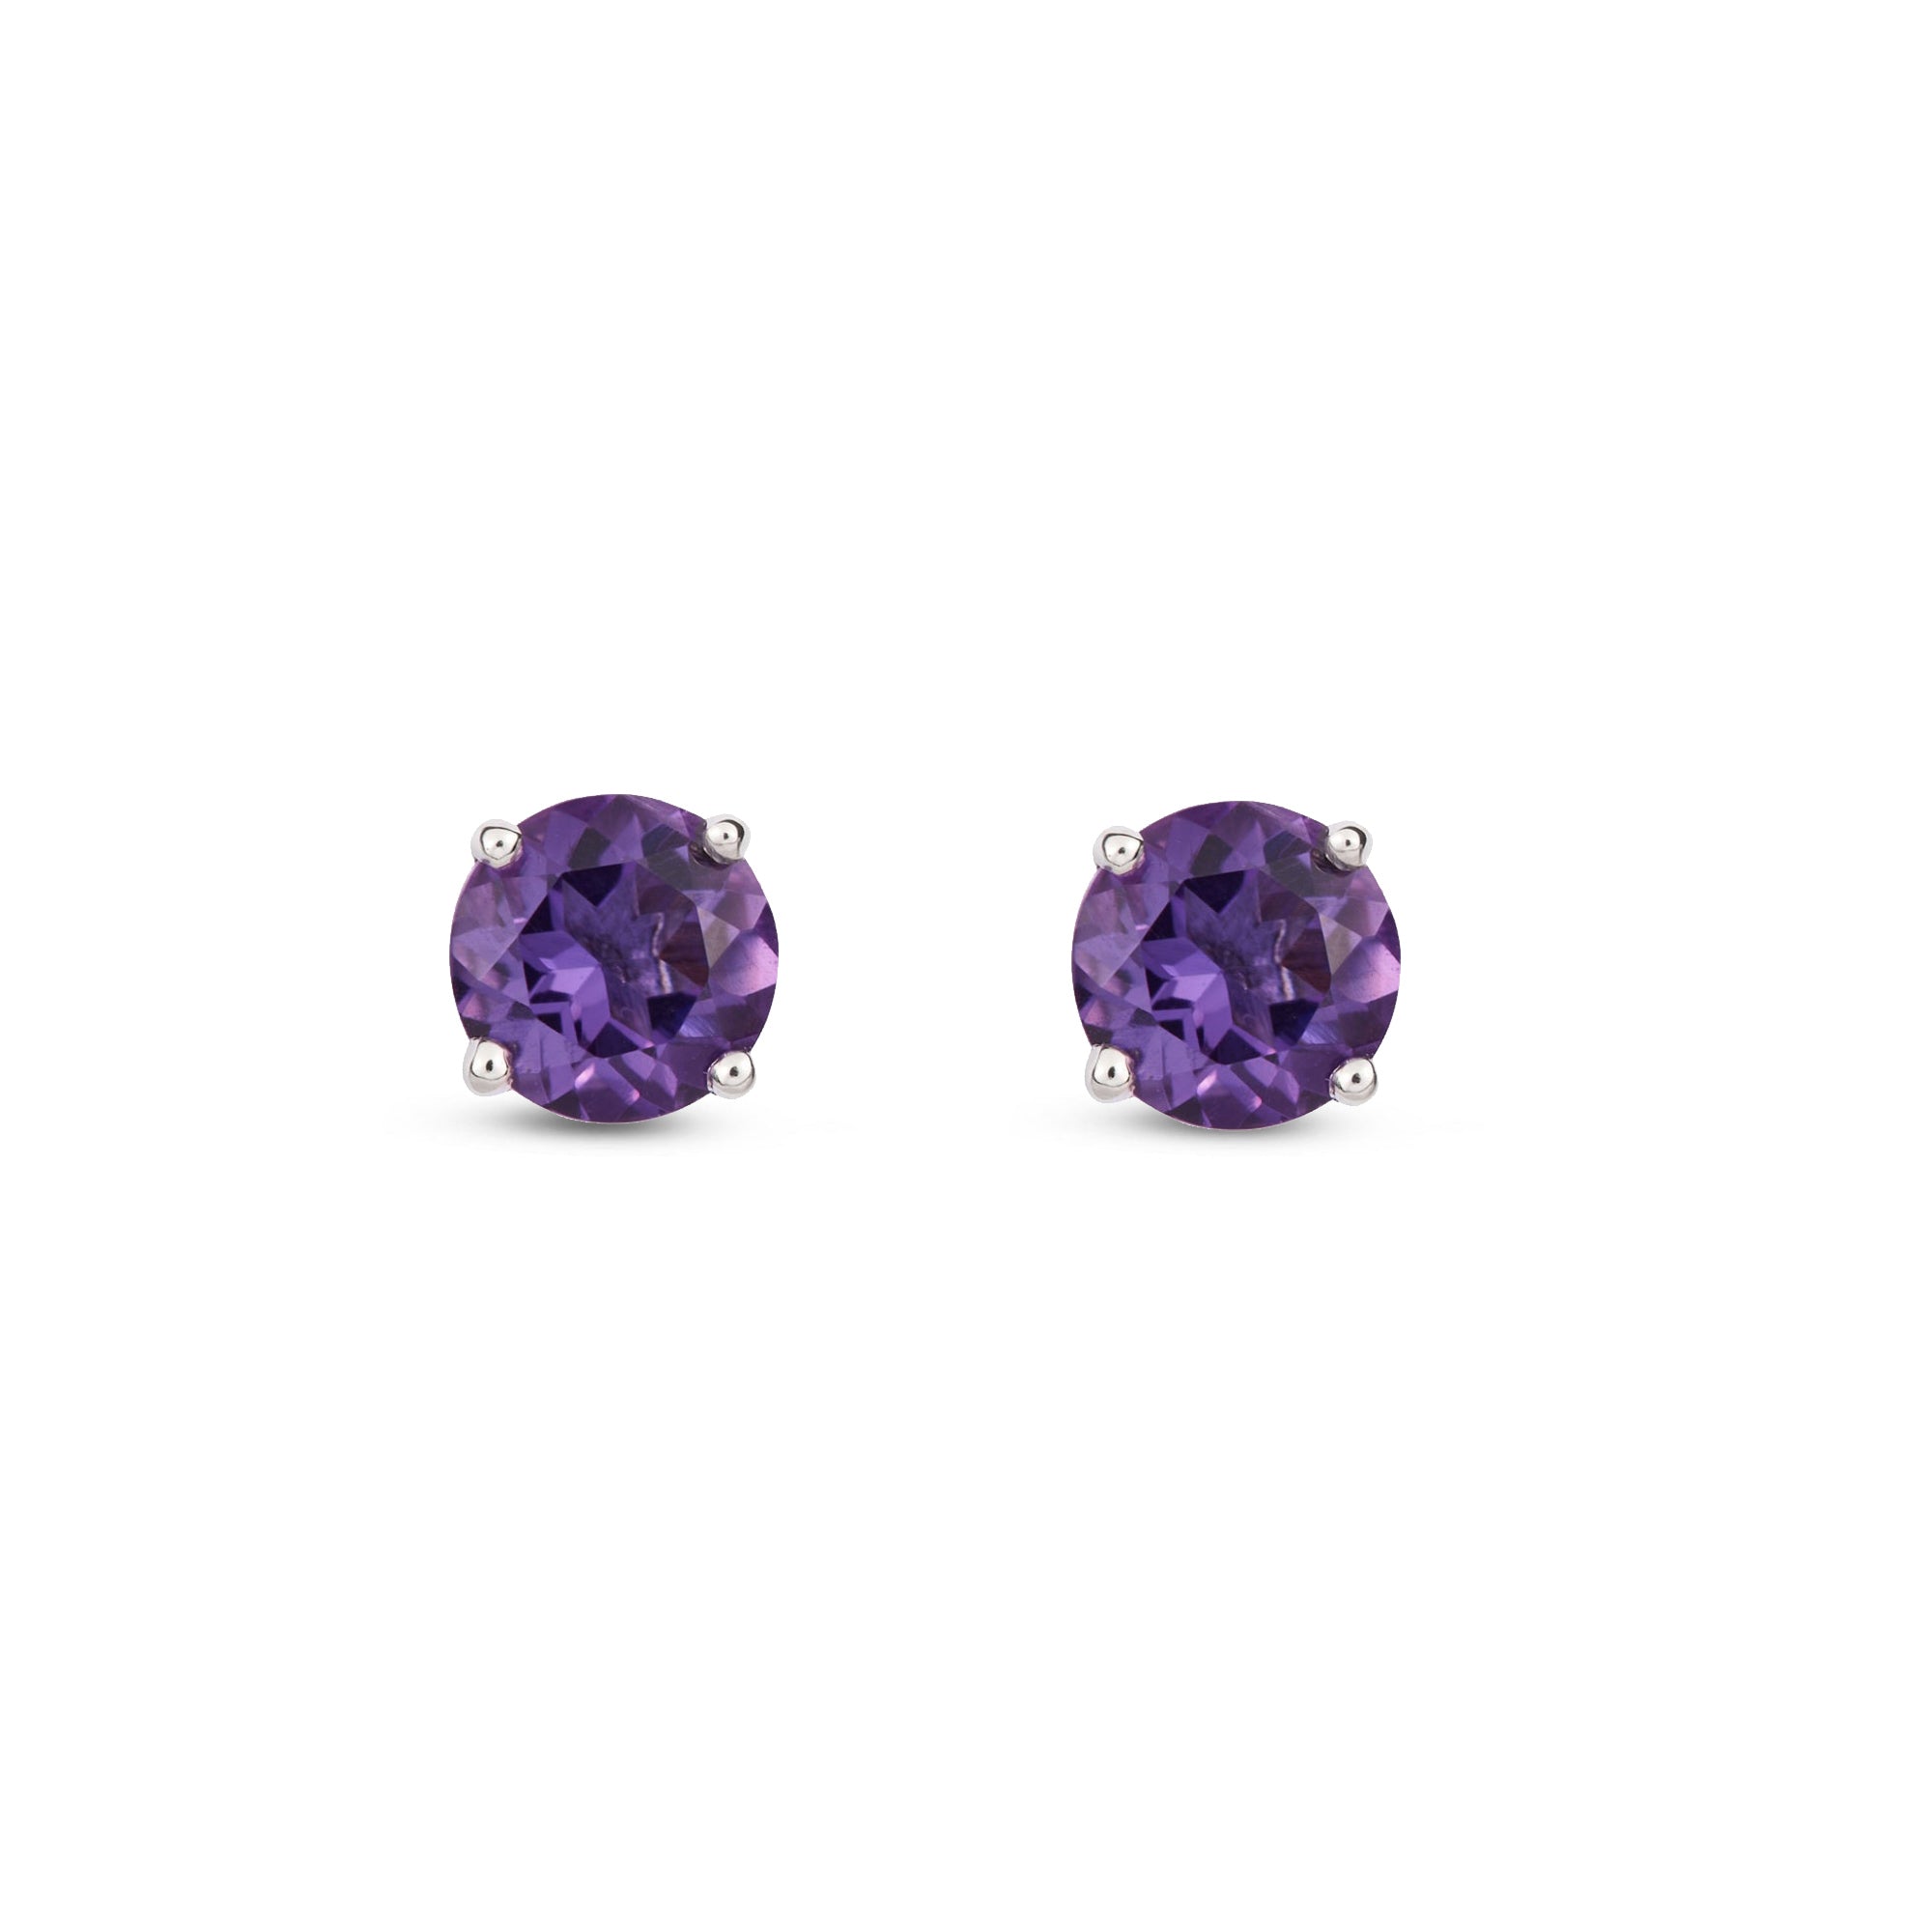 9ct White Gold Amethyst Four Claw Round Stud Earrings